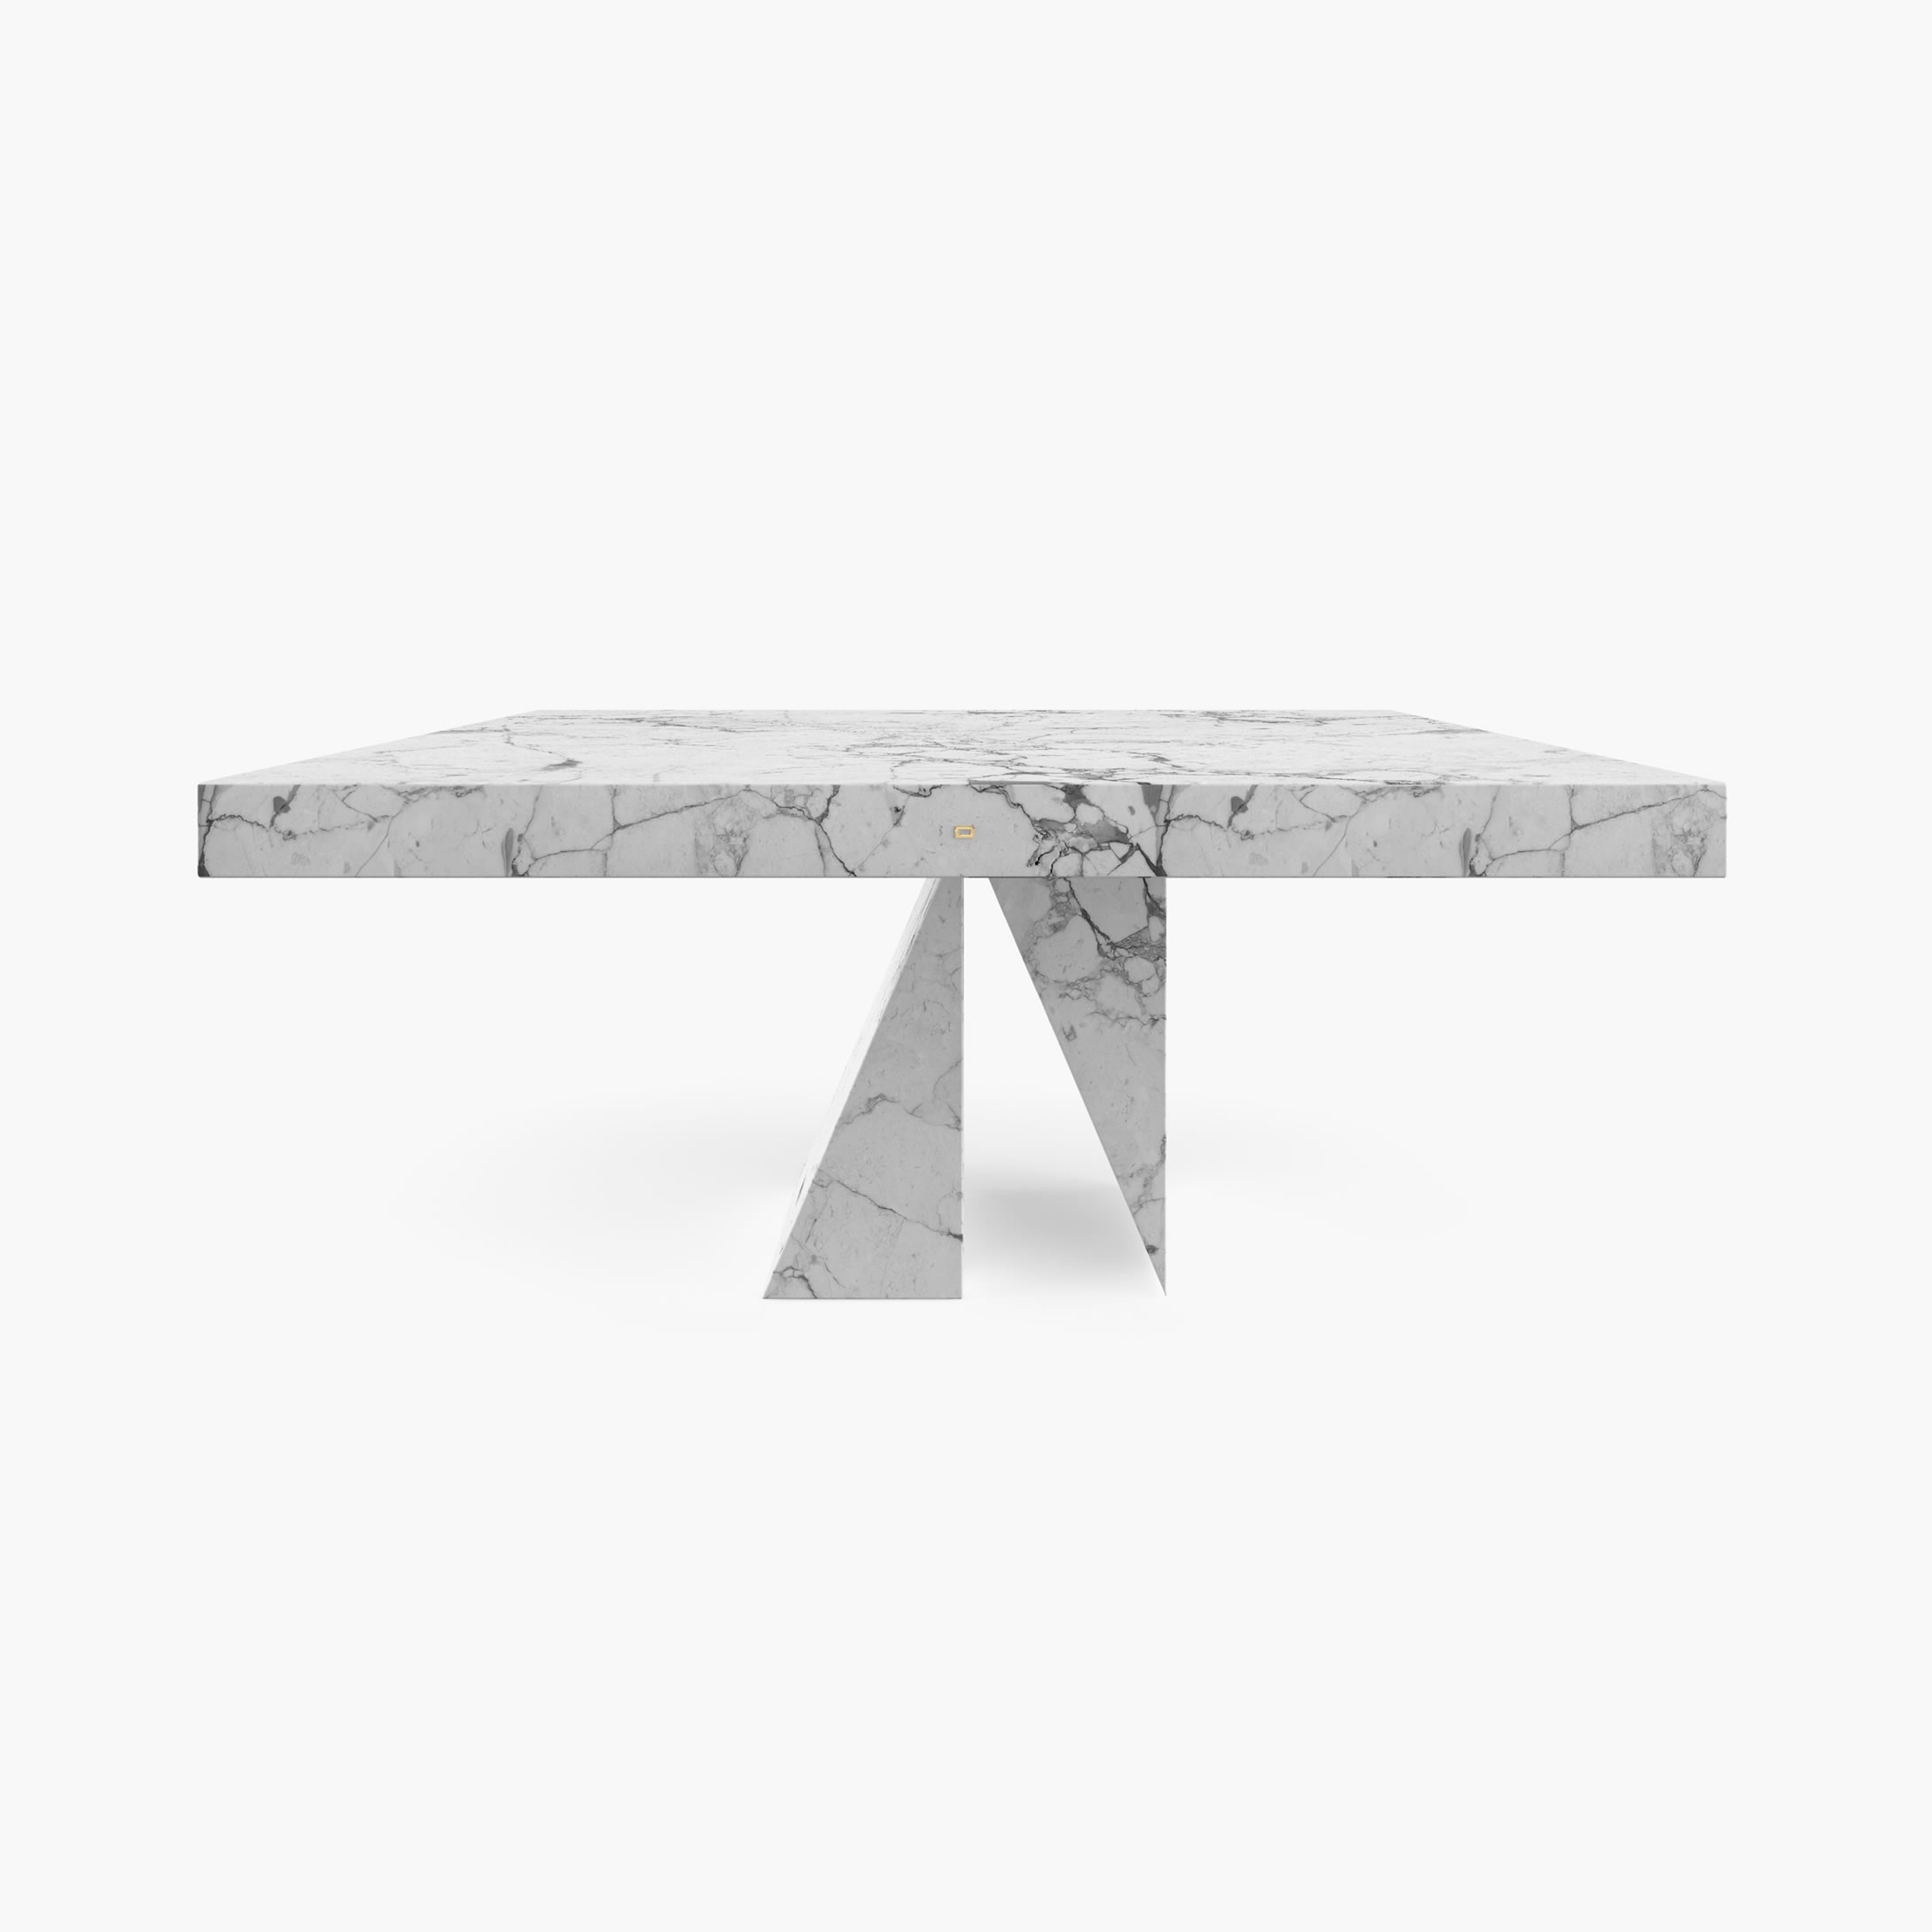 Dining Table prisms legs White Arabescato Marble iconic Dining Room modern art Dining Tables FS 194 I FELIX SCHWAKE